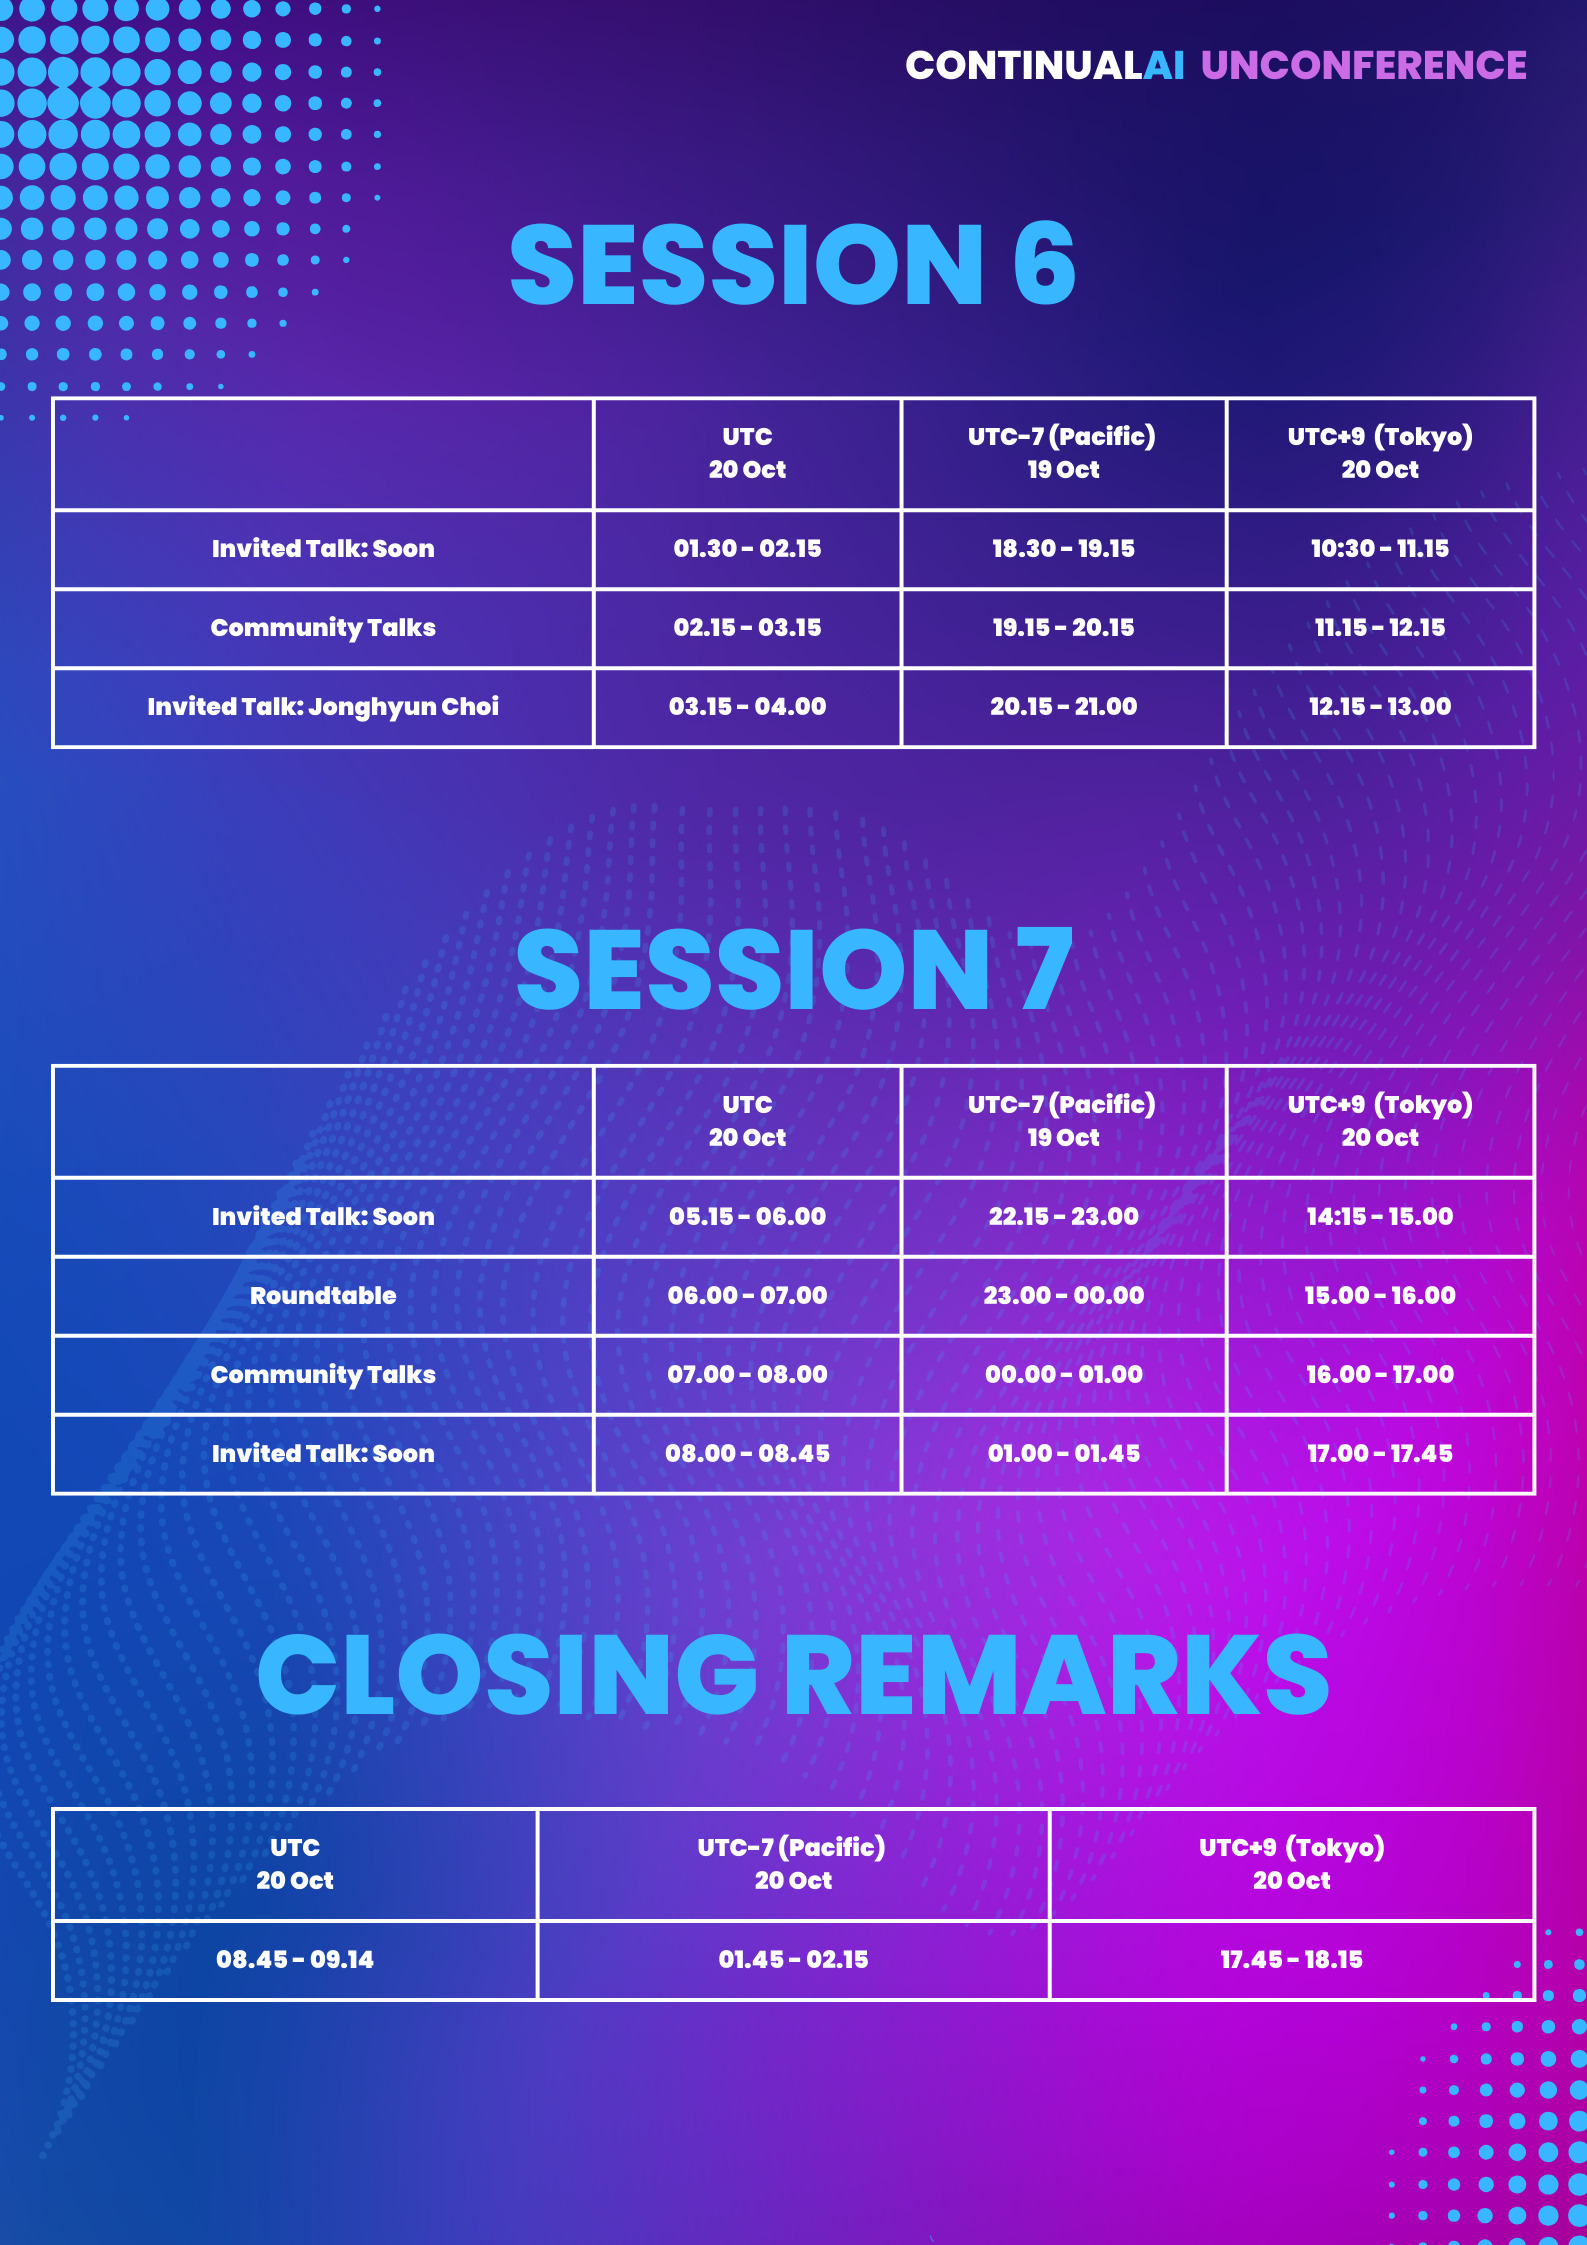 Schedule of Session 6, Session 7, Closing remarks